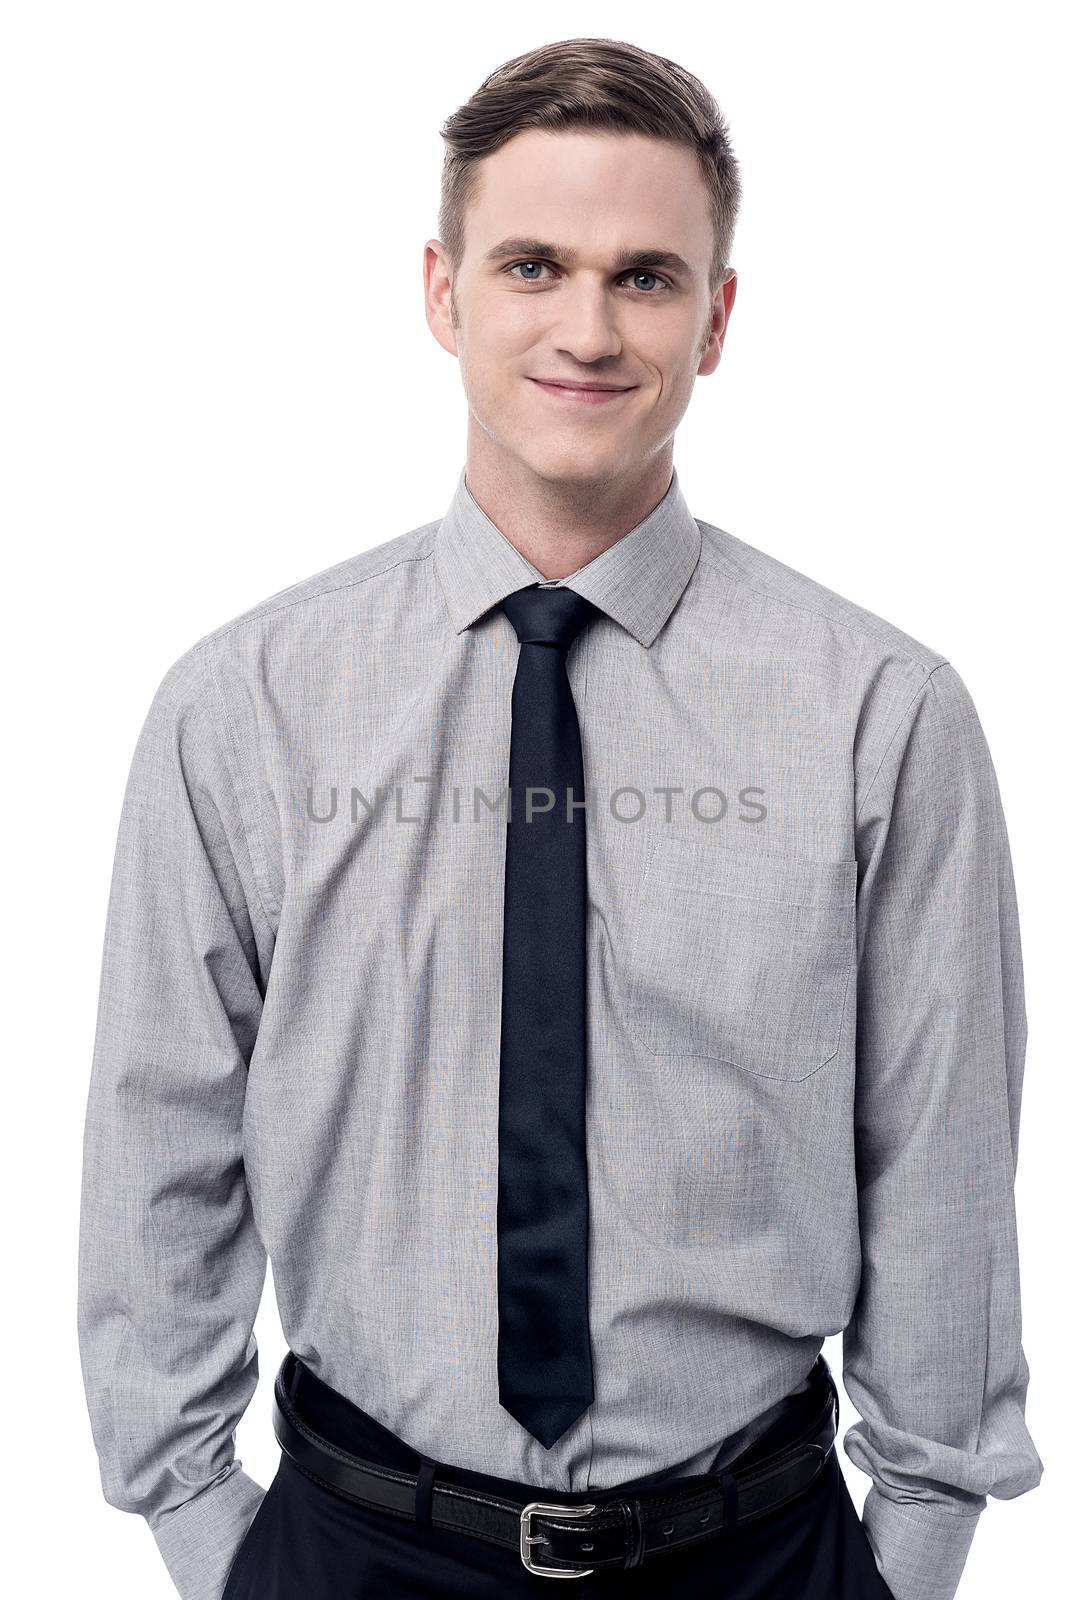 Confident male executive with hands in his pockets